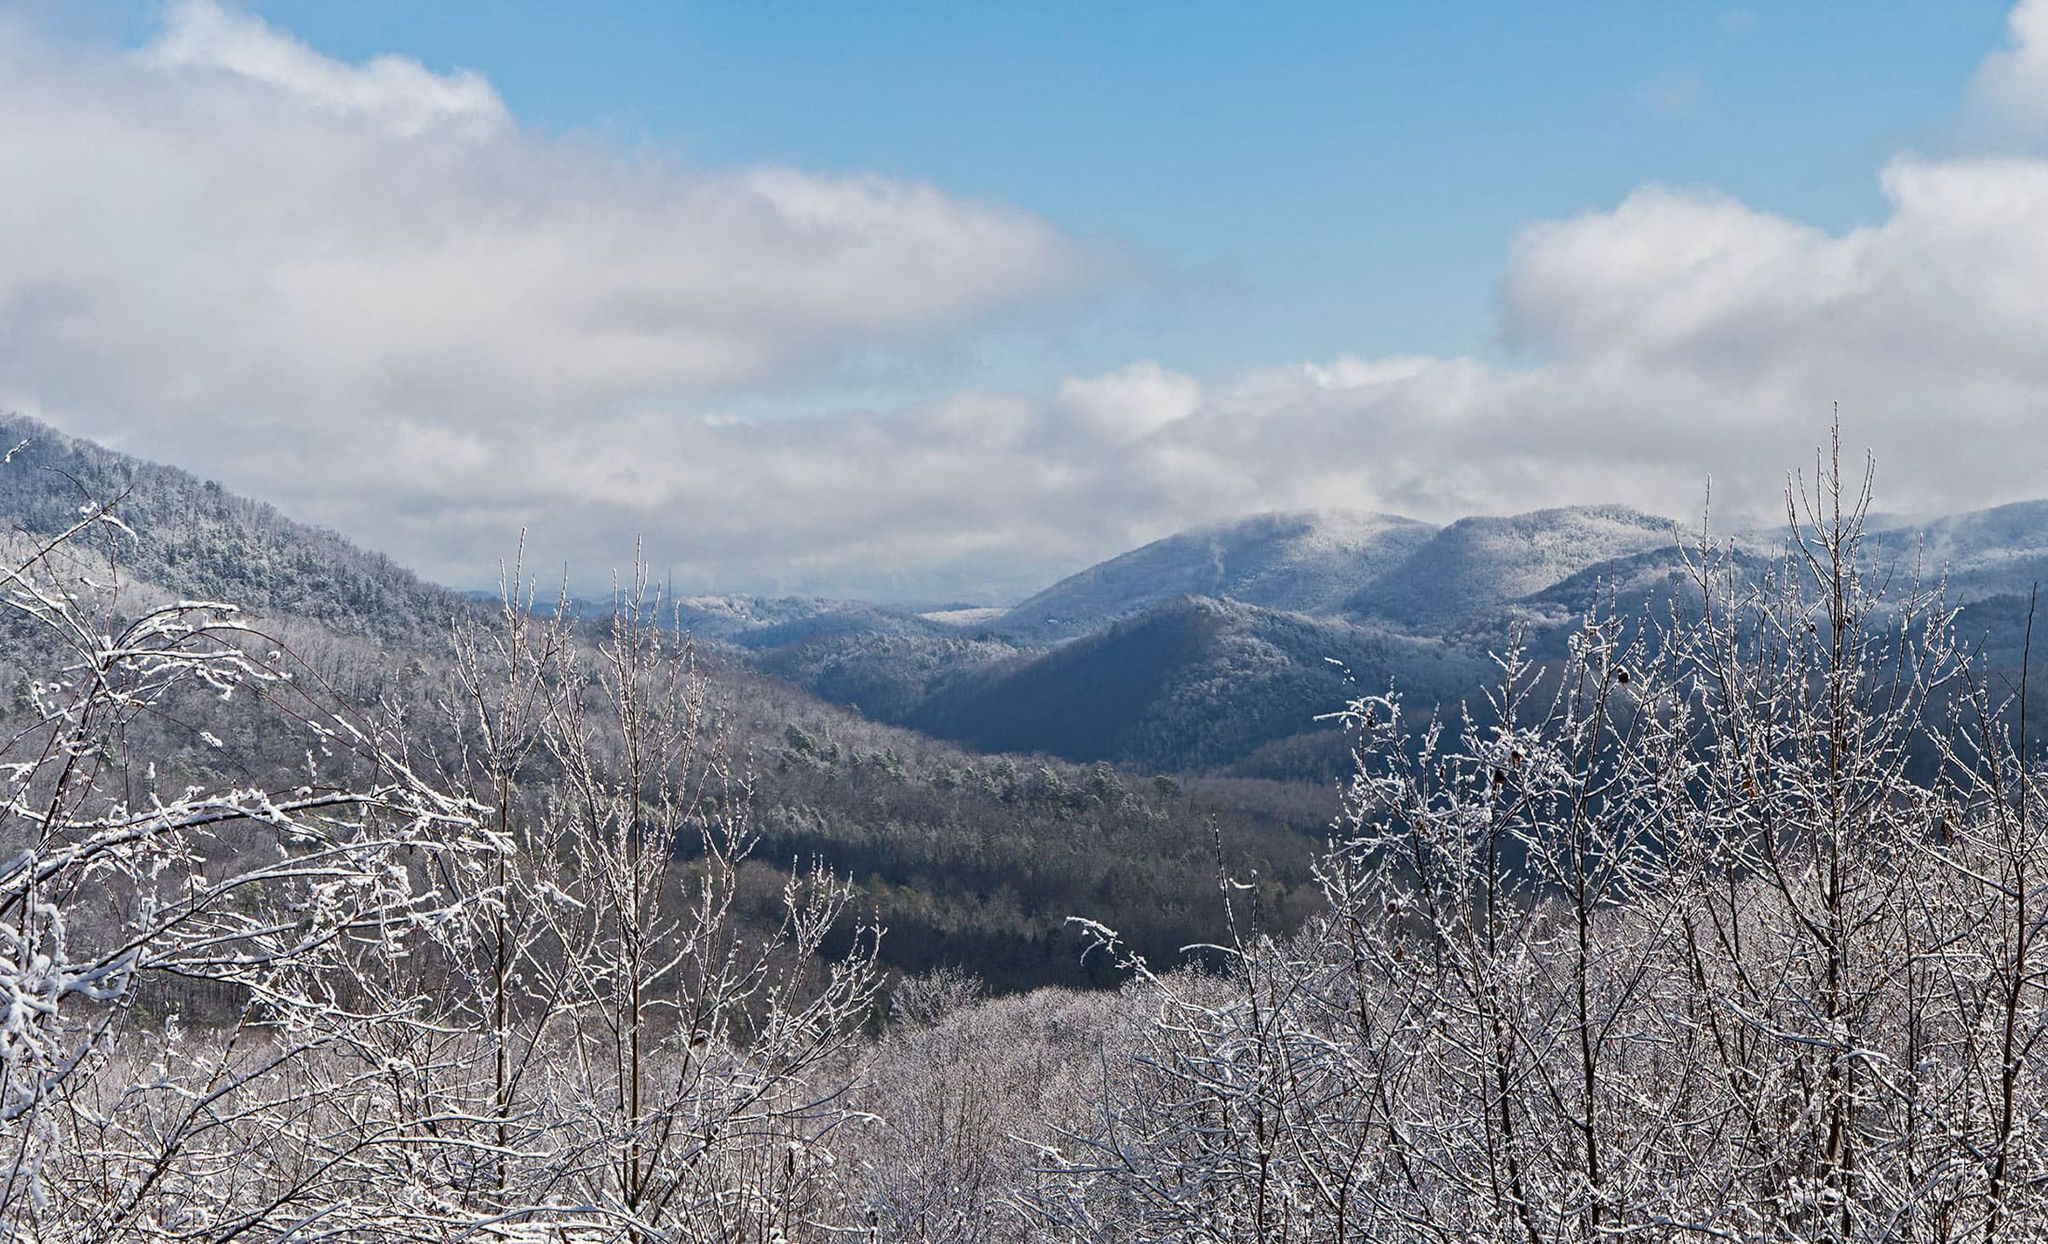 Frosty morning in the Great Smoky Mountains, Tennessee